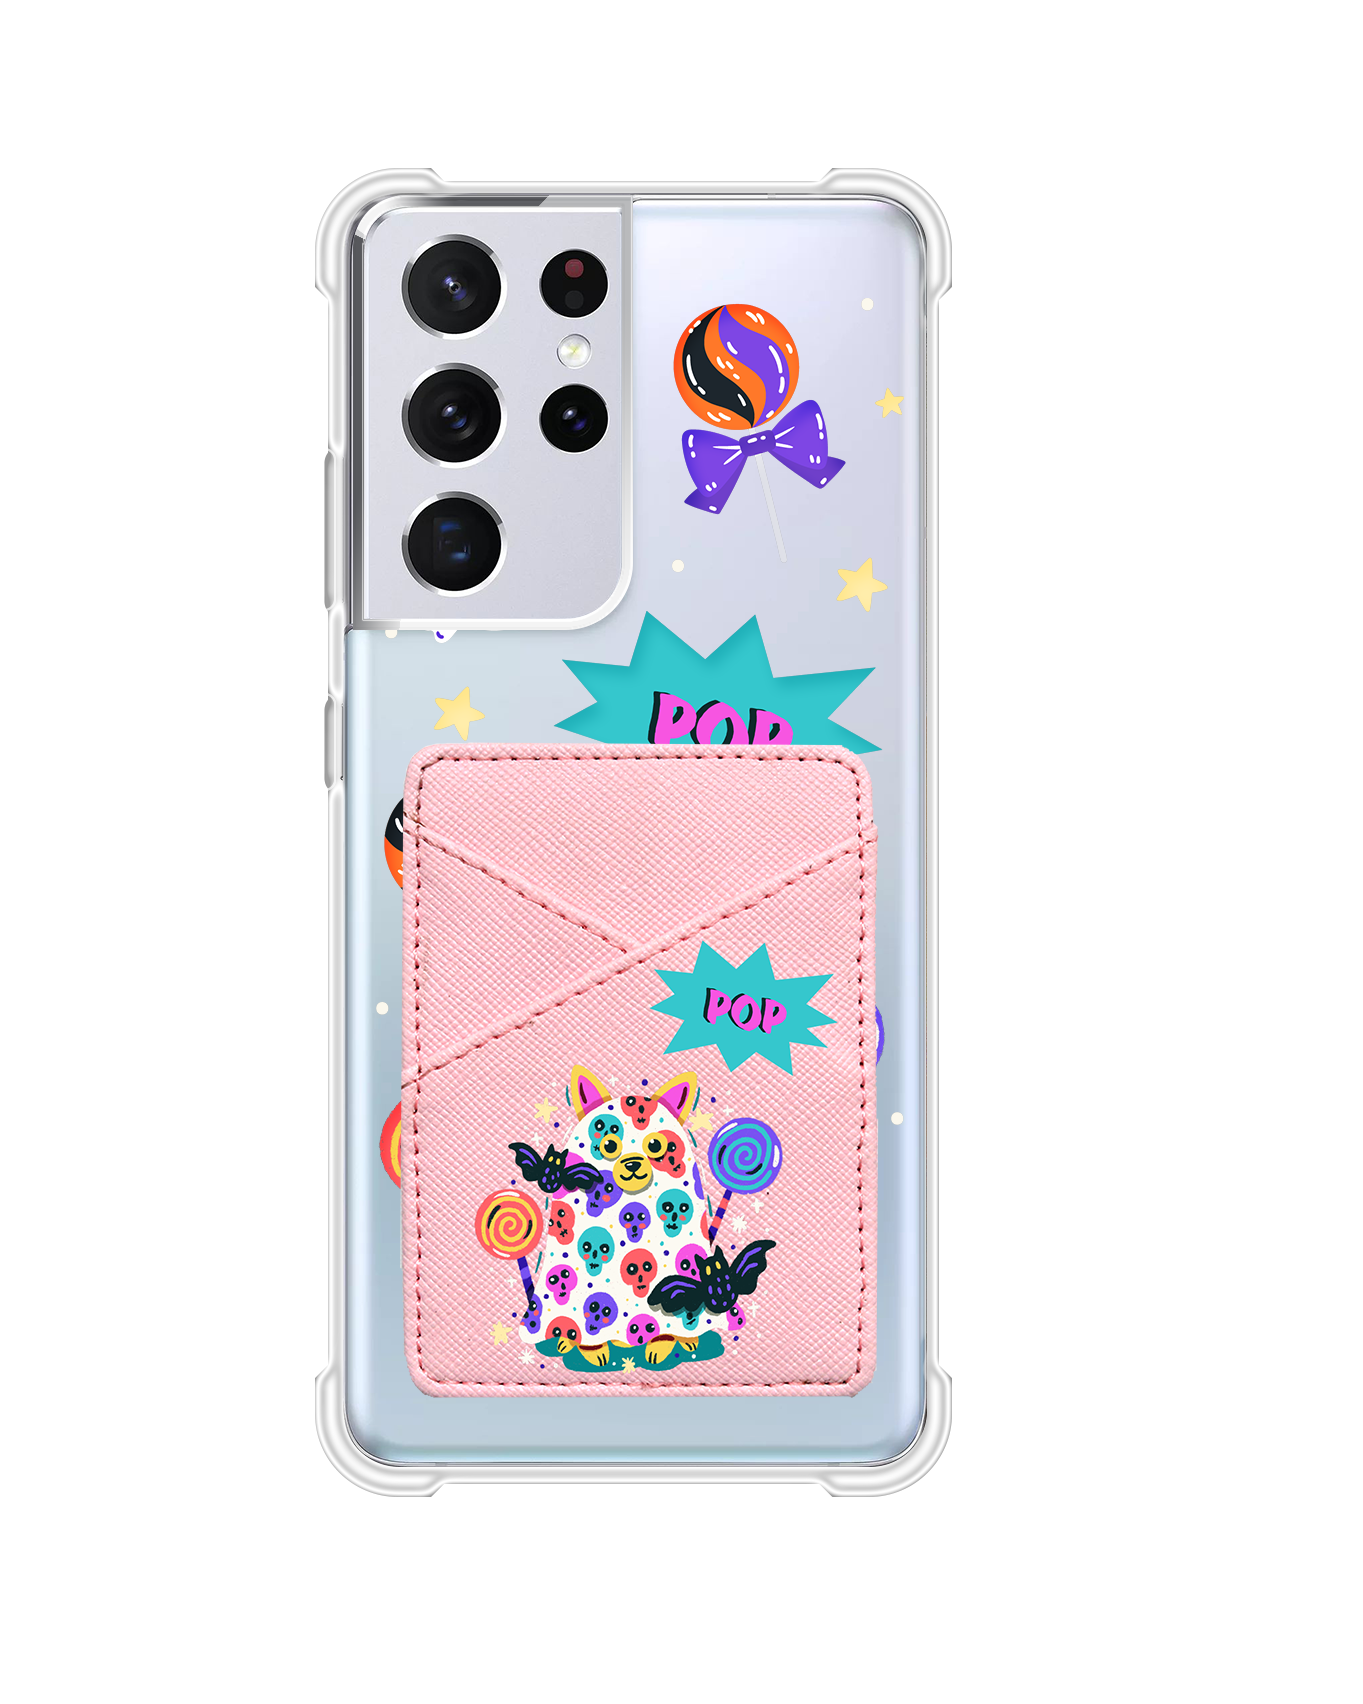 Android Phone Wallet Case - Puppy Monster